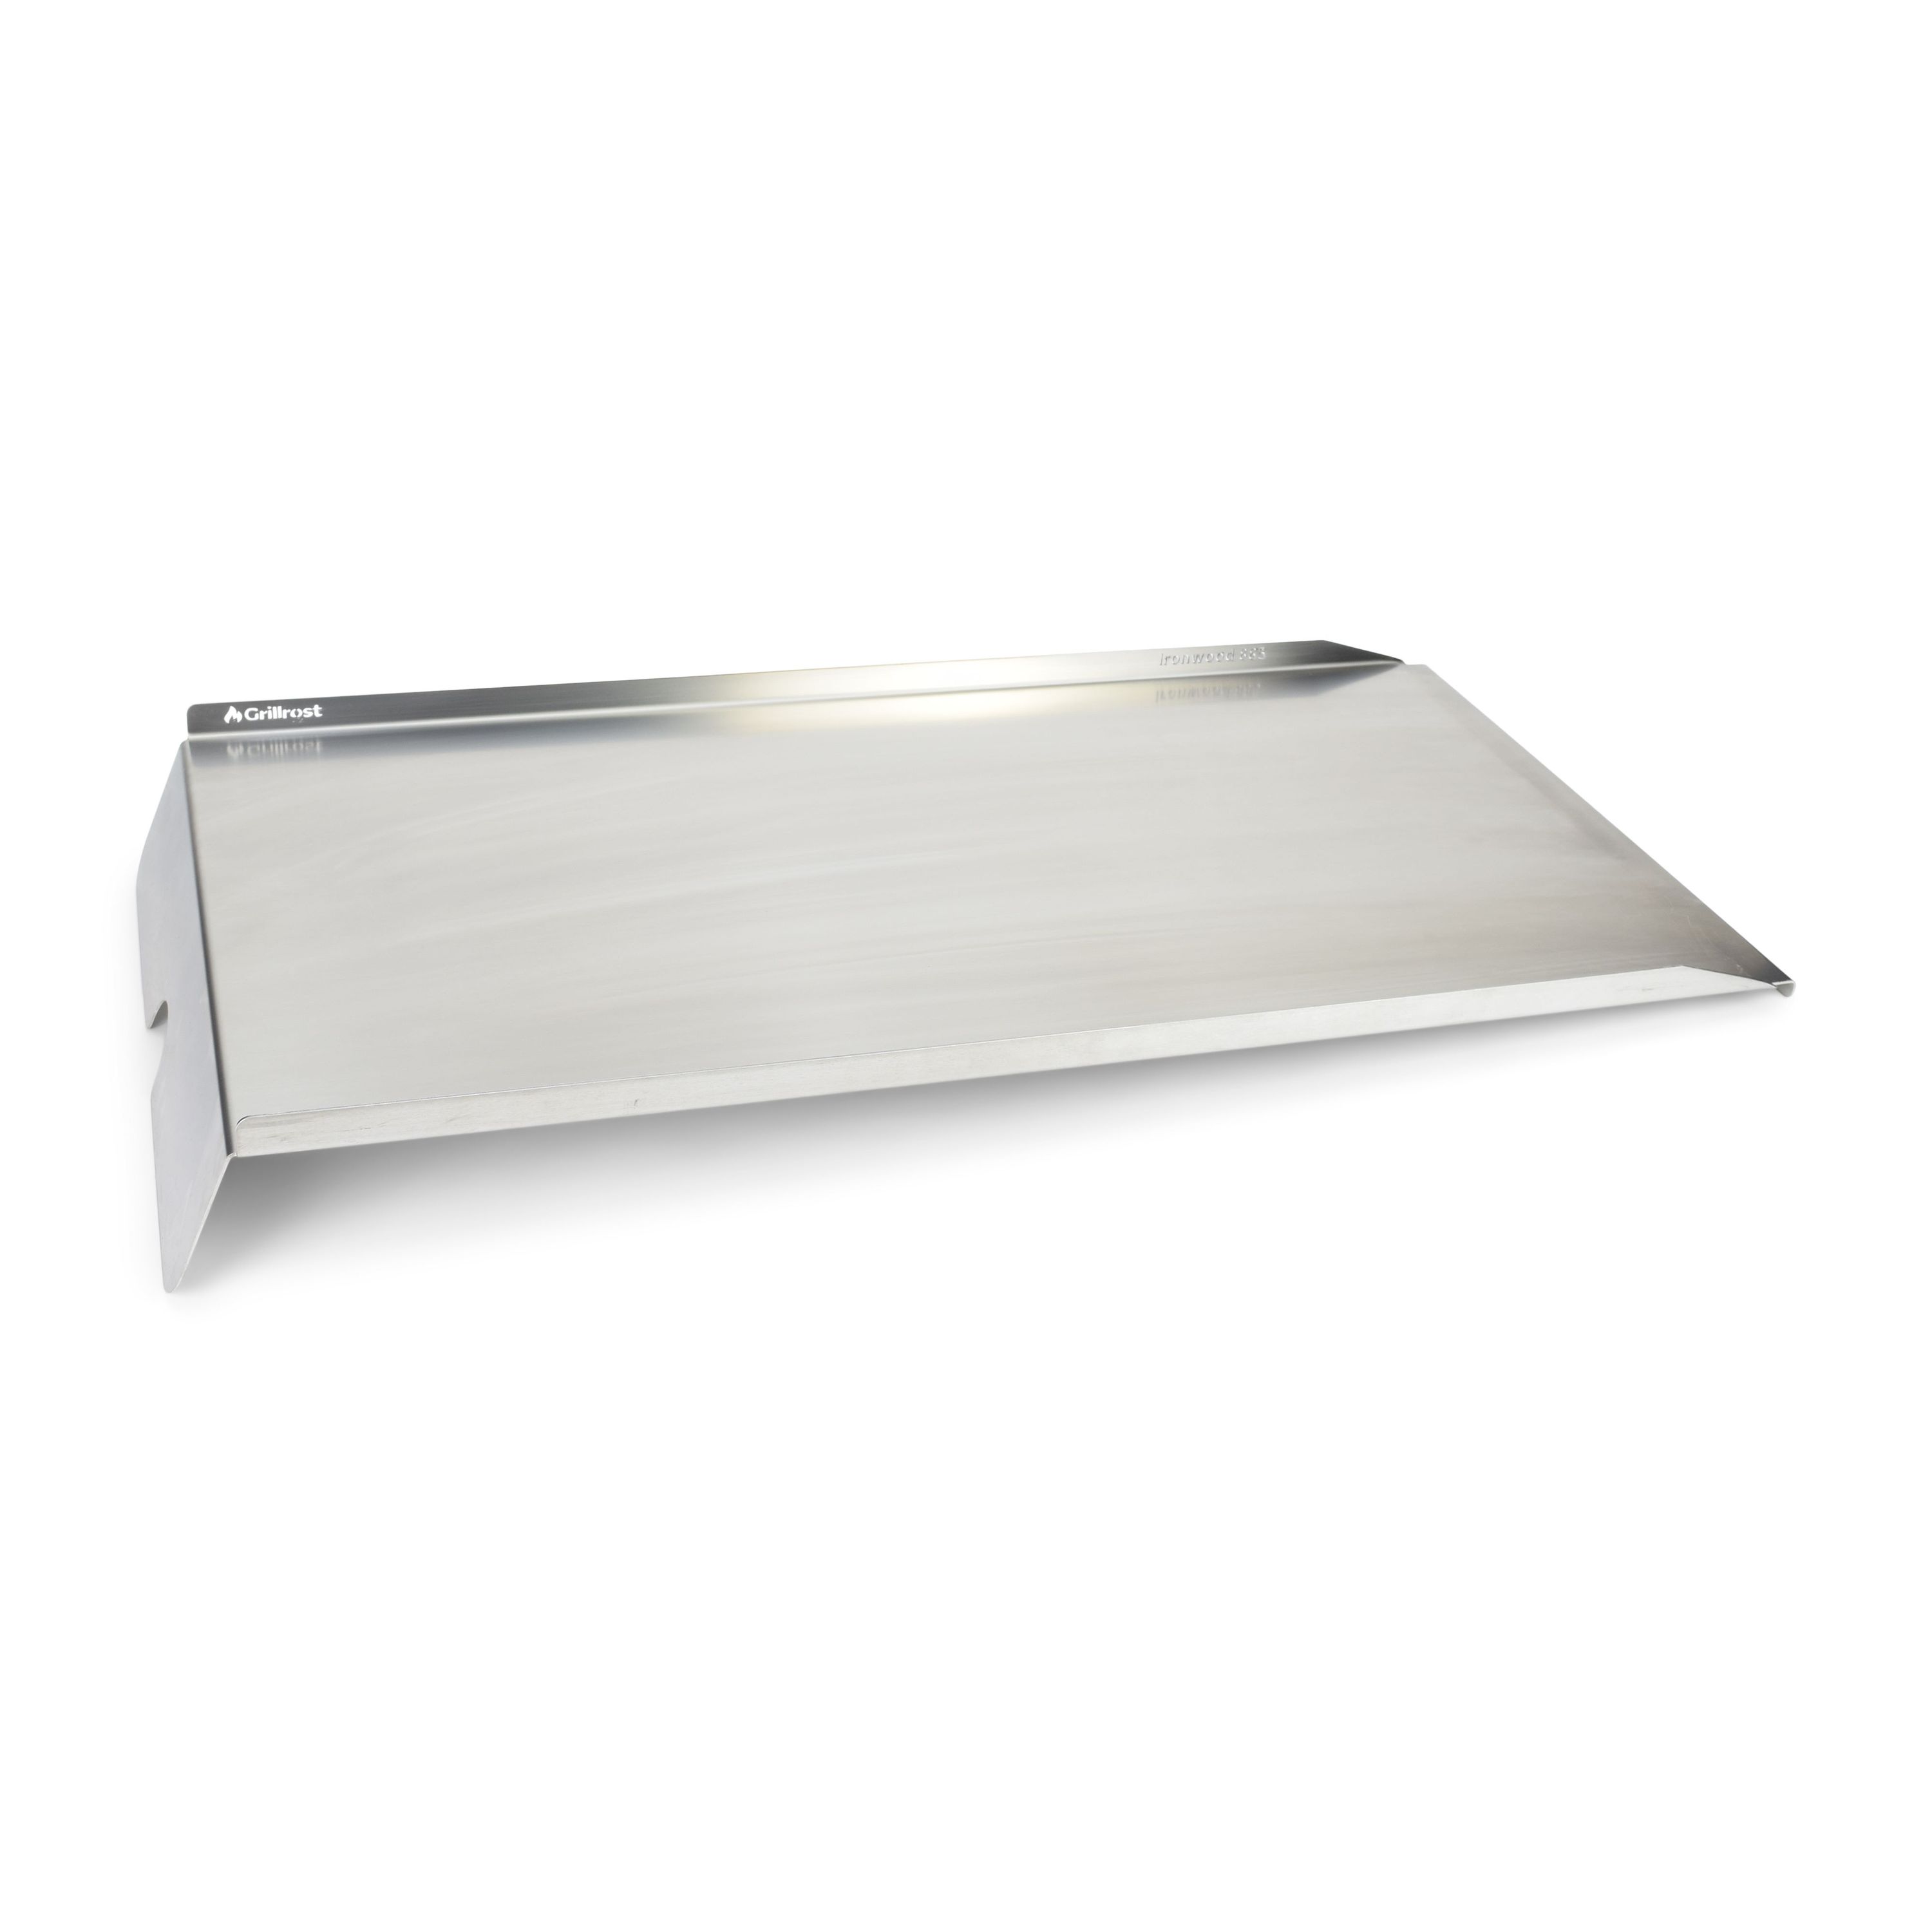 Stainless steel grease drain plate for carrier Ironwood 885